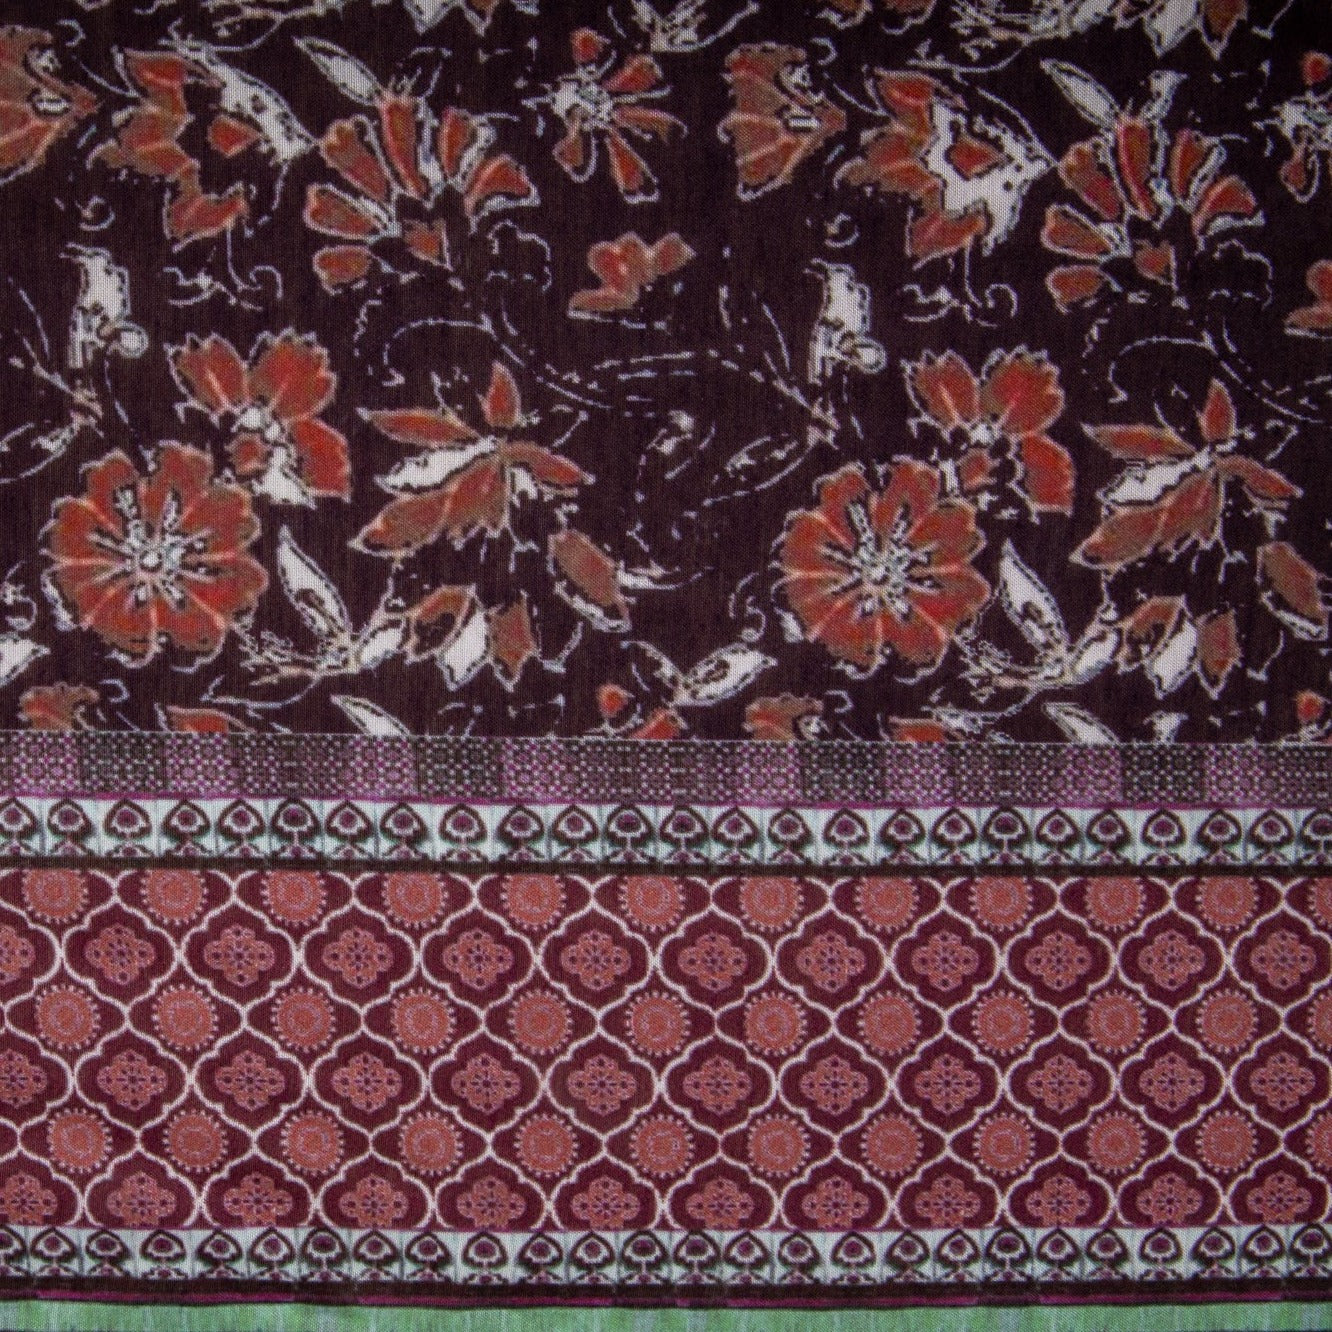 Wine Red Floral Print Viscose Voile Fabric Trade Uno